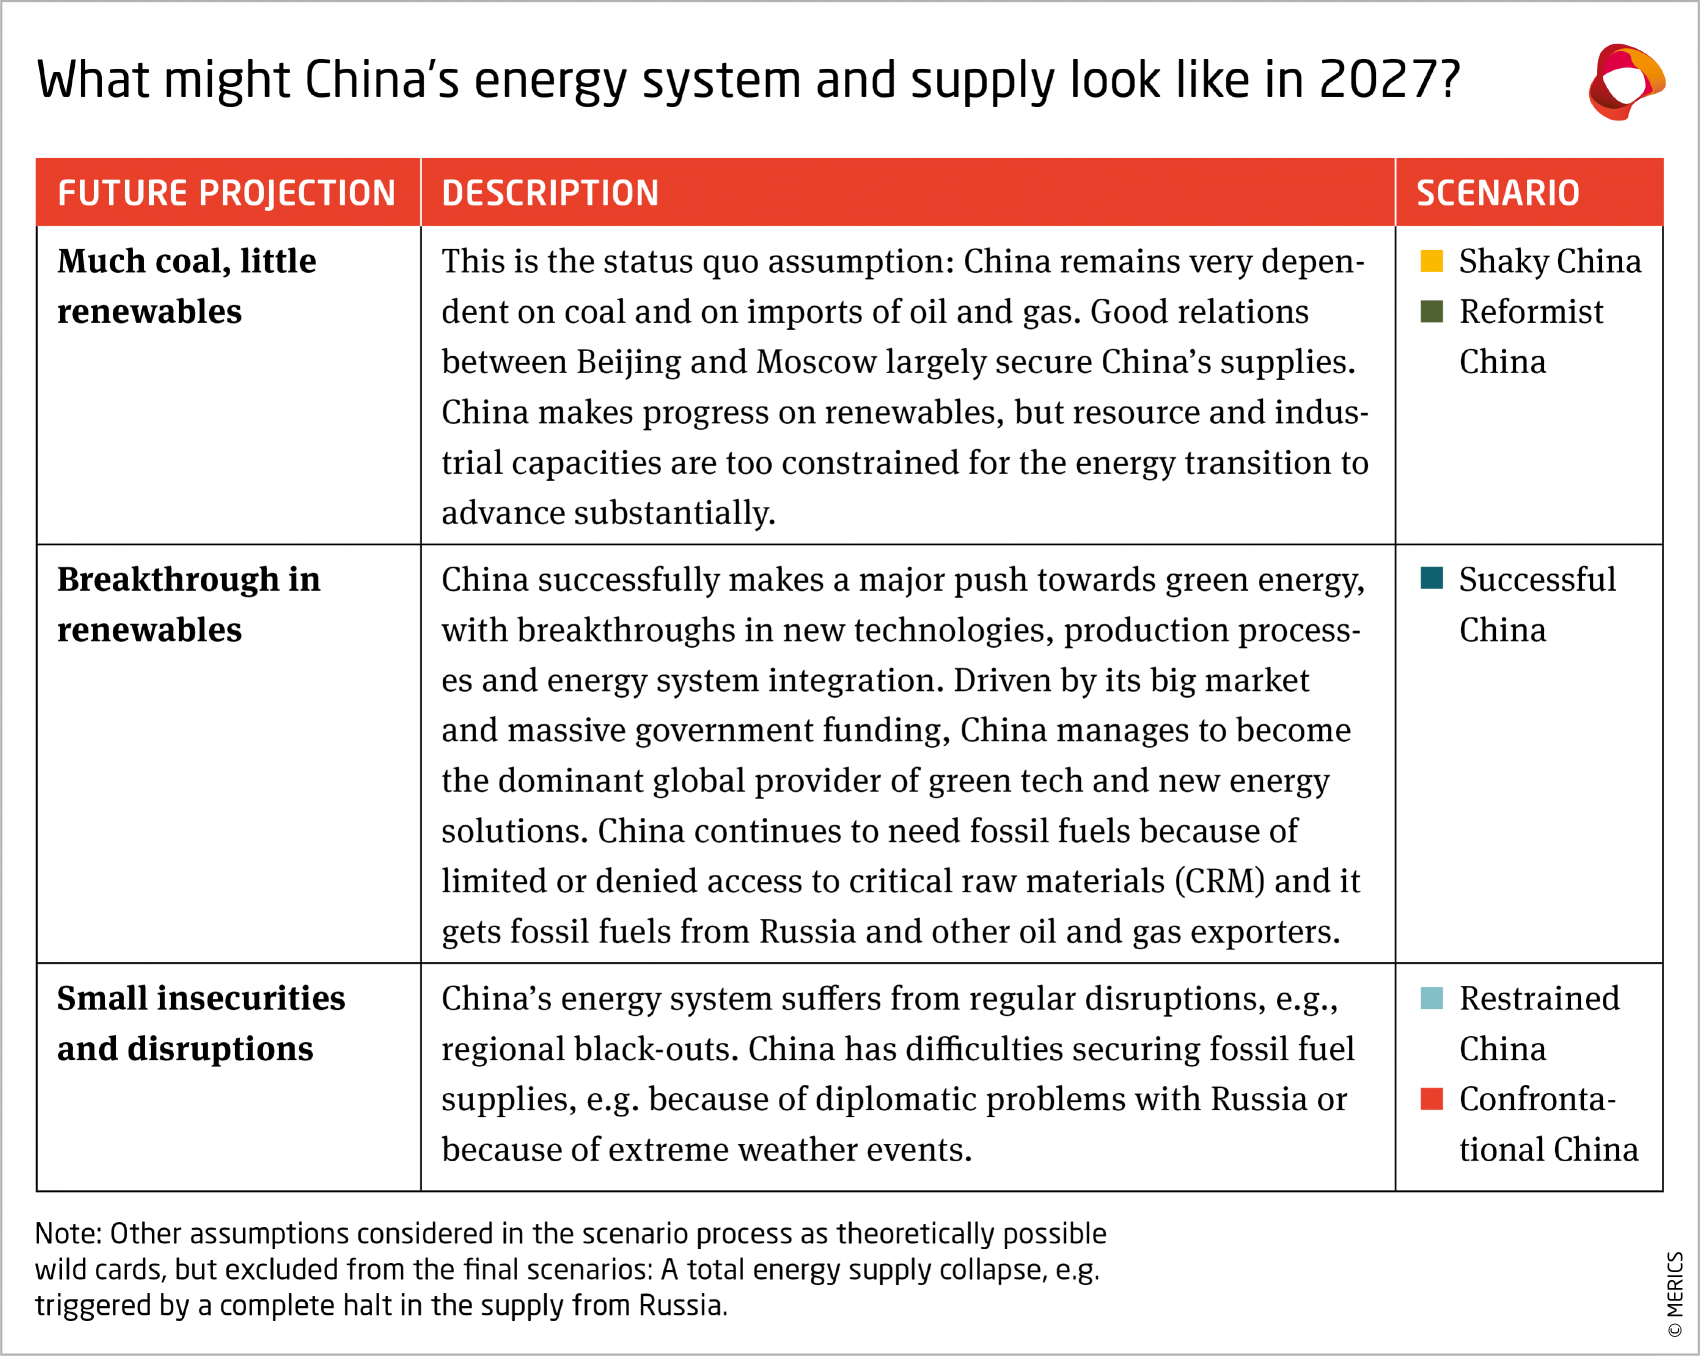 China's energy system supply in 2027